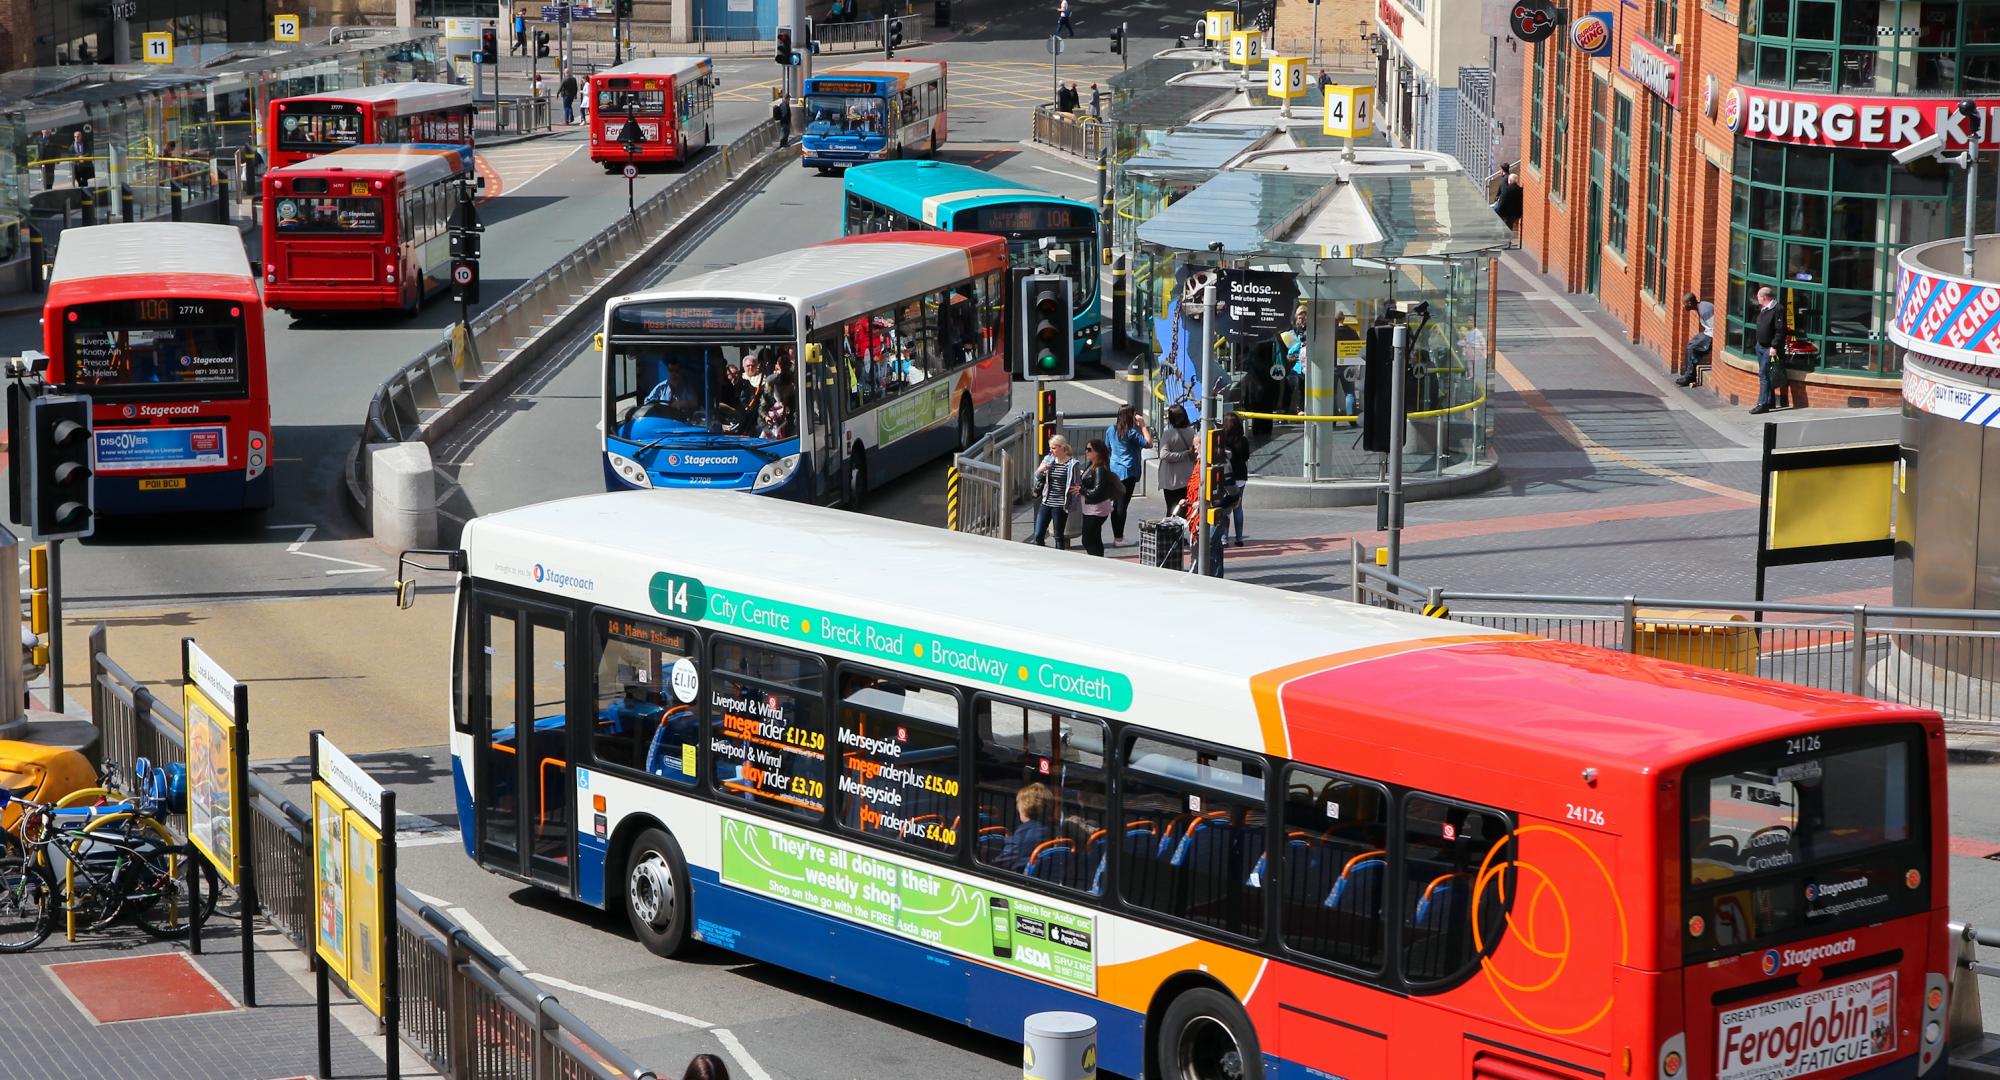 People ride StageCoach buses on in Liverpool, UK.